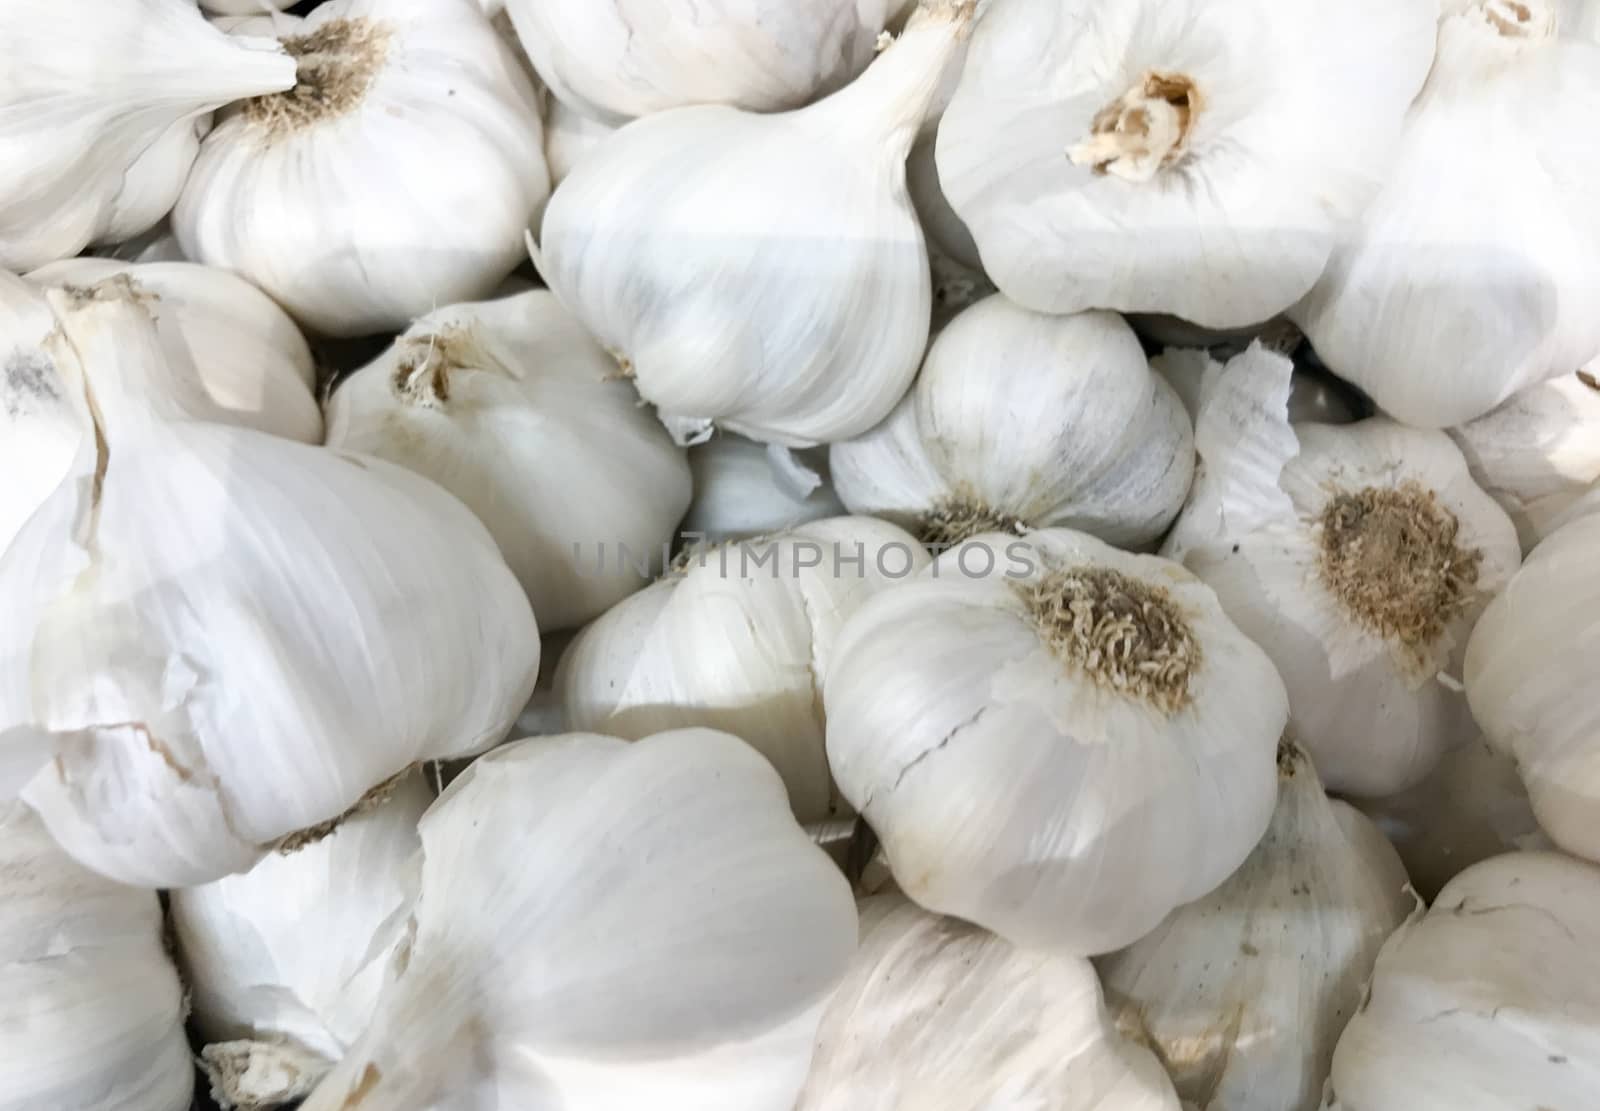 Garlic Is A Species In The Onion Genus, Allium. Its Close Relatives Include The Onion, Shallot, Leek, Chive, And Chinese Onion. by nenovbrothers